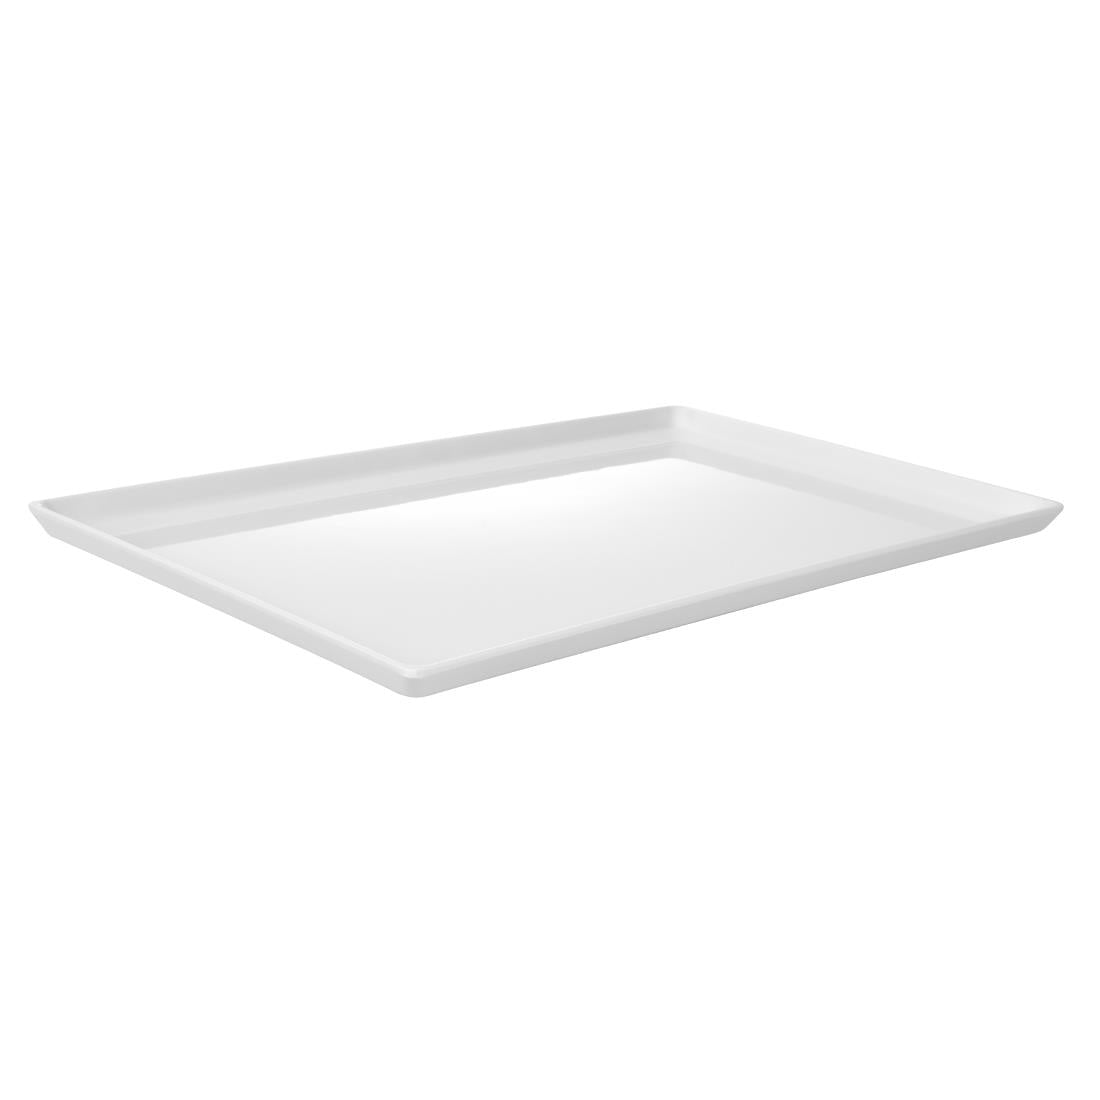 GF074 APS Float Melamine Tray White GN 1/1 JD Catering Equipment Solutions Ltd